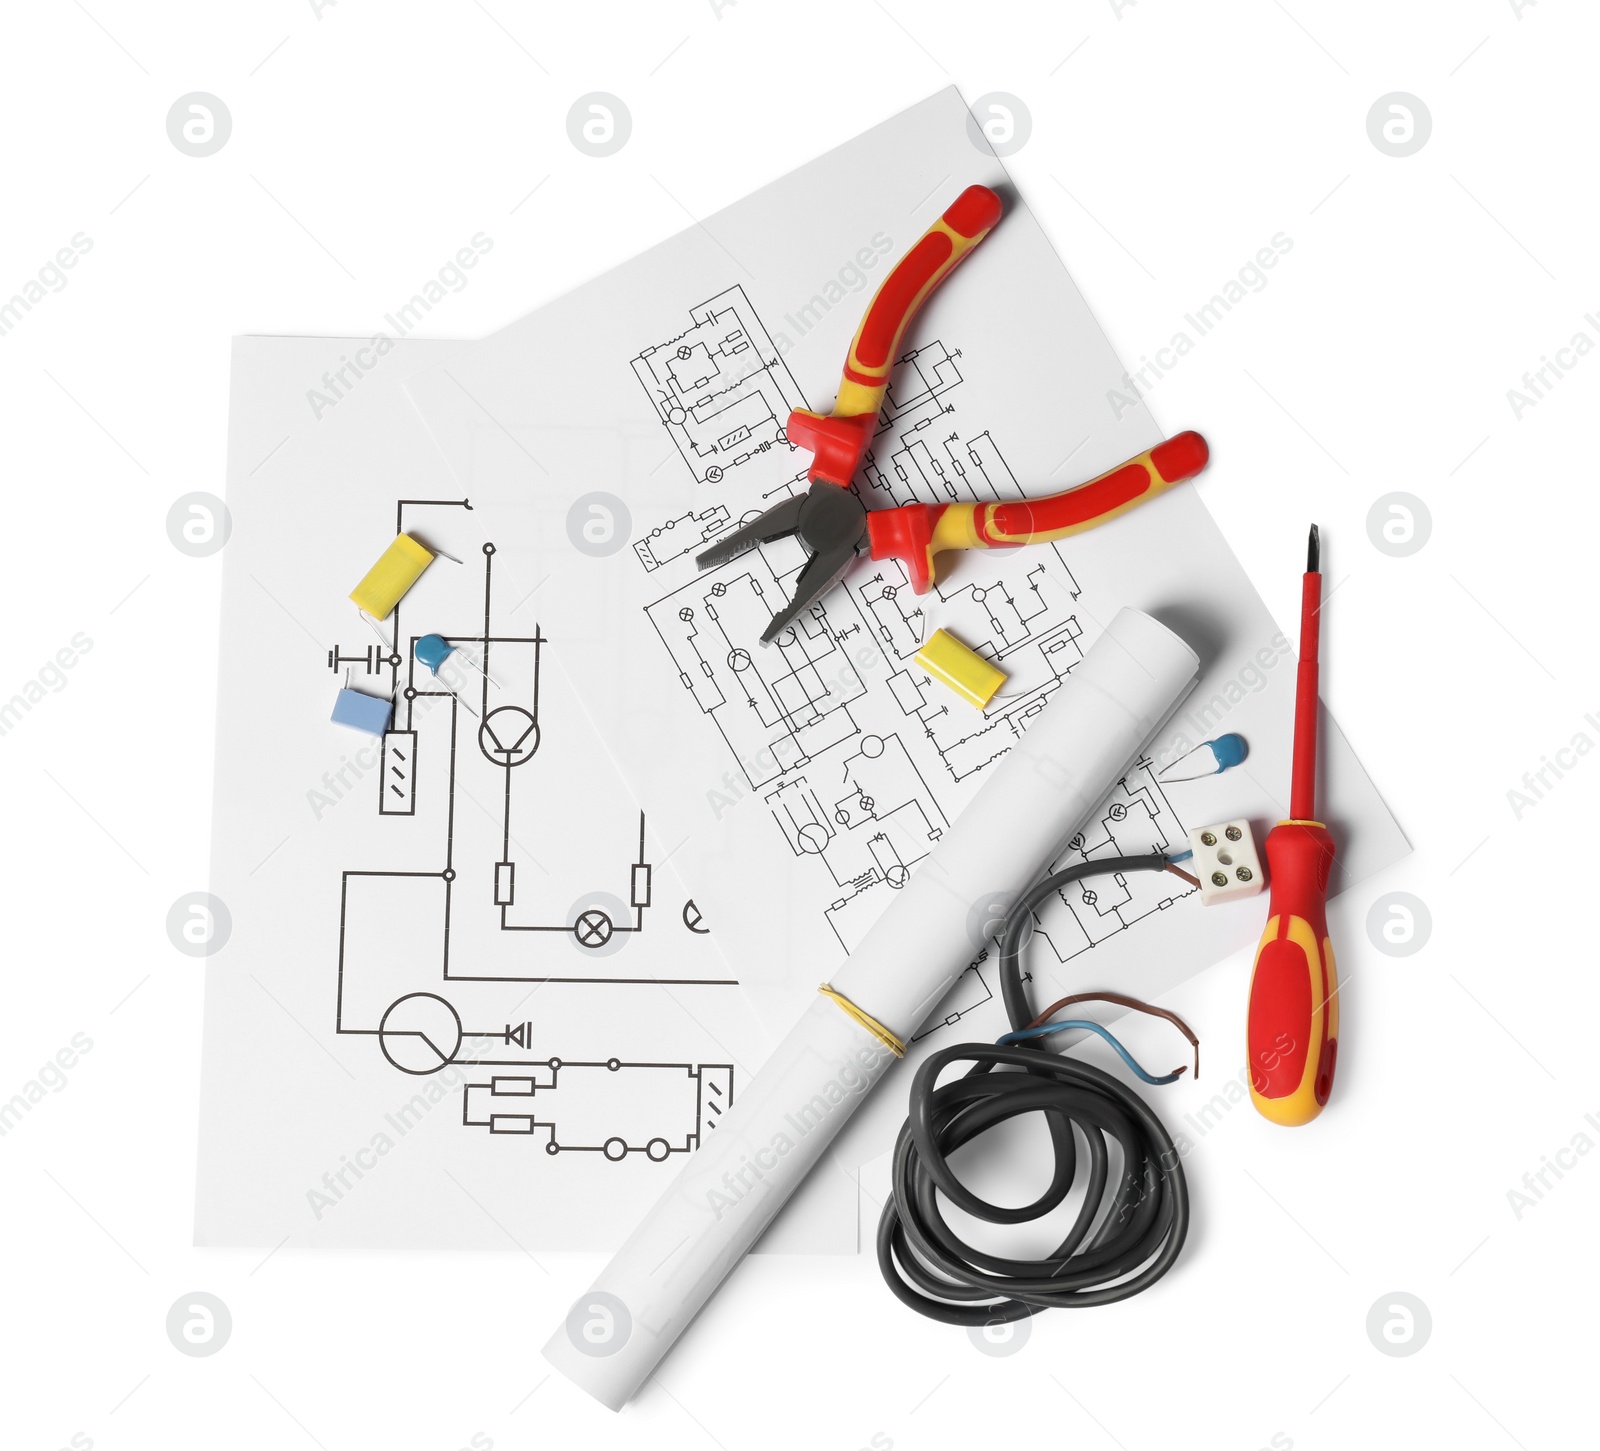 Photo of Wiring diagrams, wires and tools isolated on white, top view